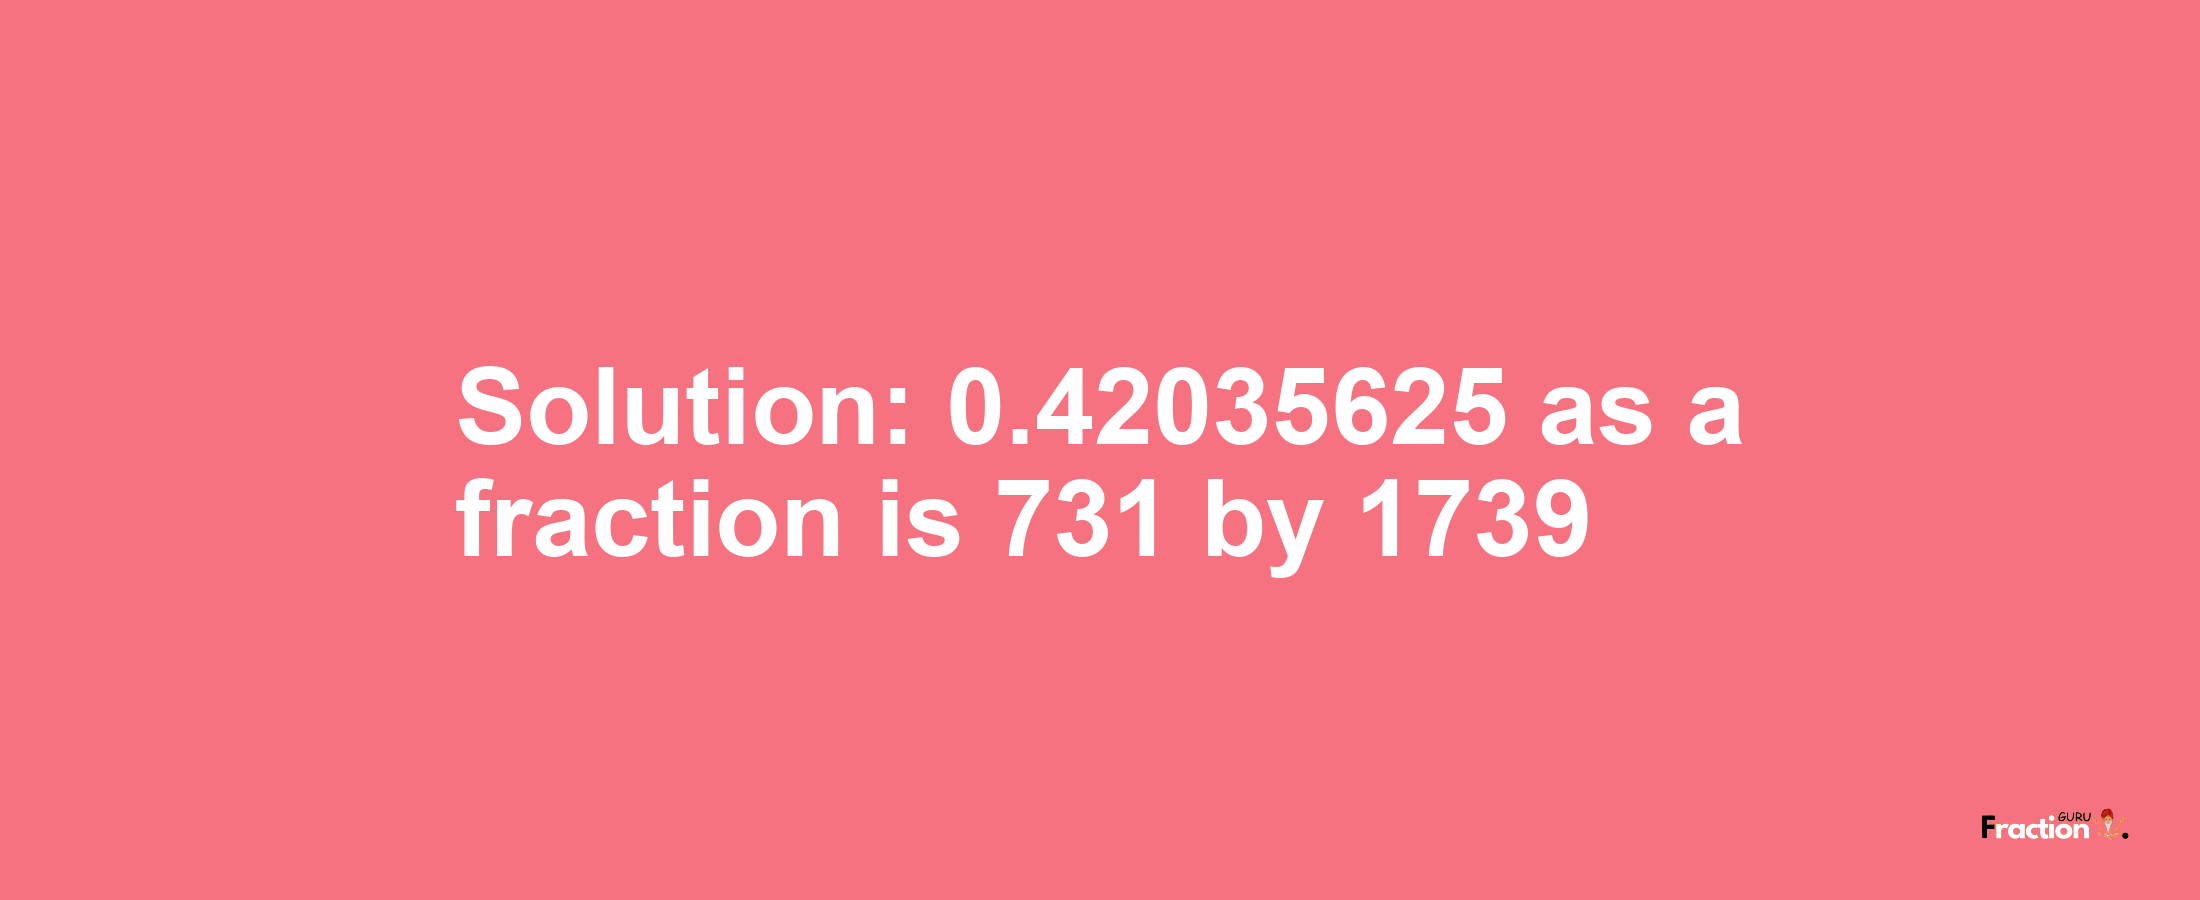 Solution:0.42035625 as a fraction is 731/1739